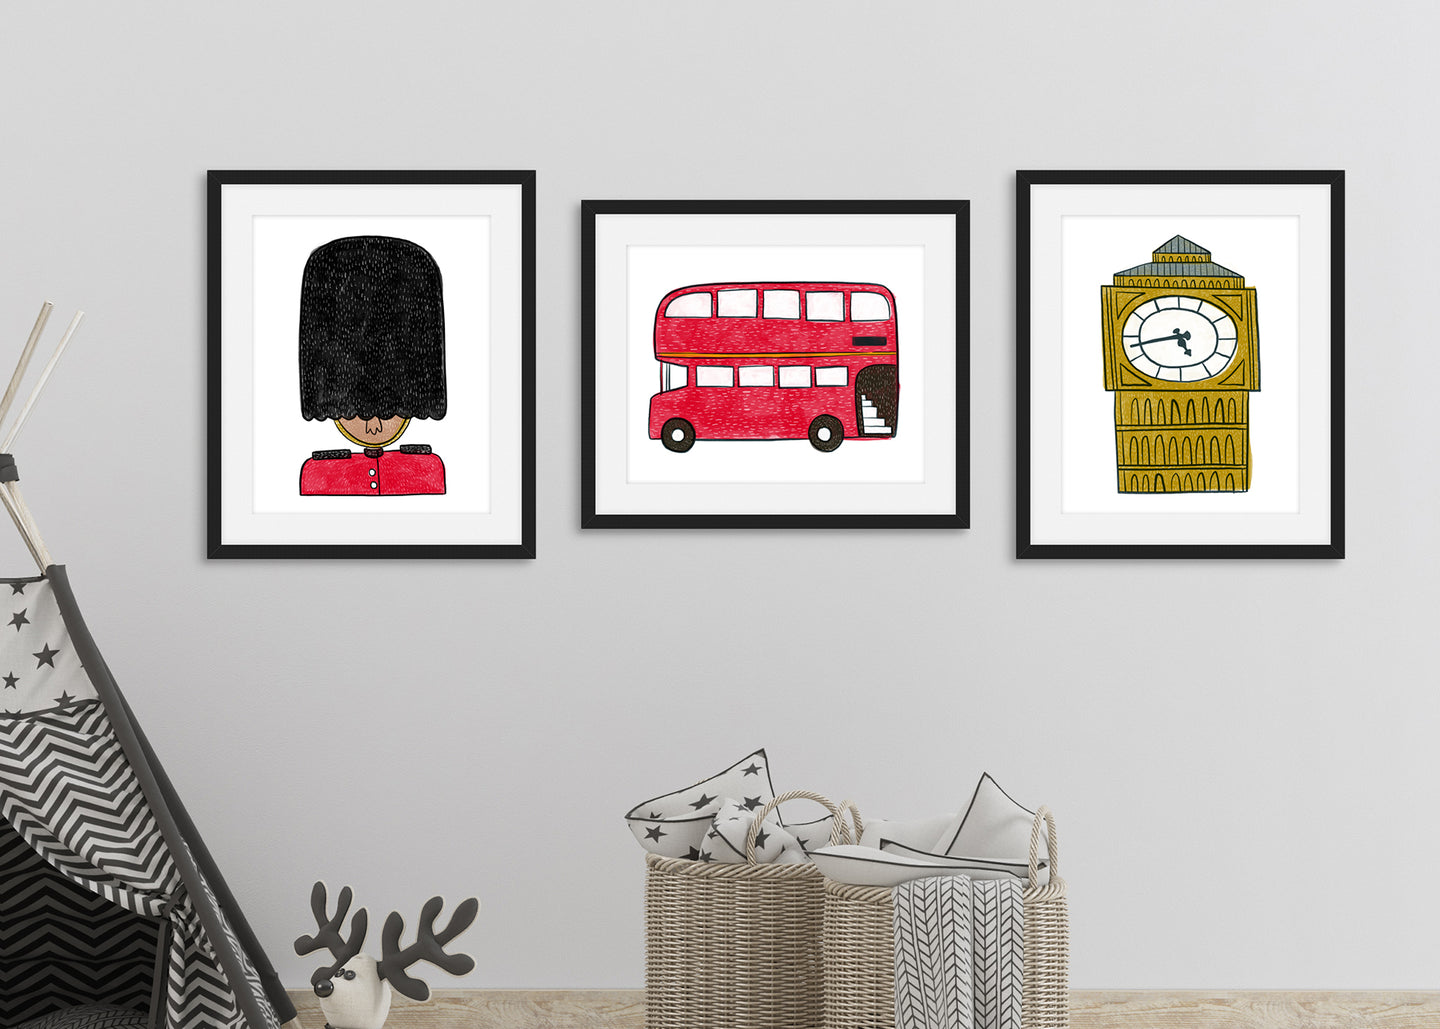 Three black frames with London illustrations in the frame. The first illustration is a queen's guard, the second a red double decker bus and the third, an illustration of Big Ben. The frames are shown in a nursery with a children's tent. 